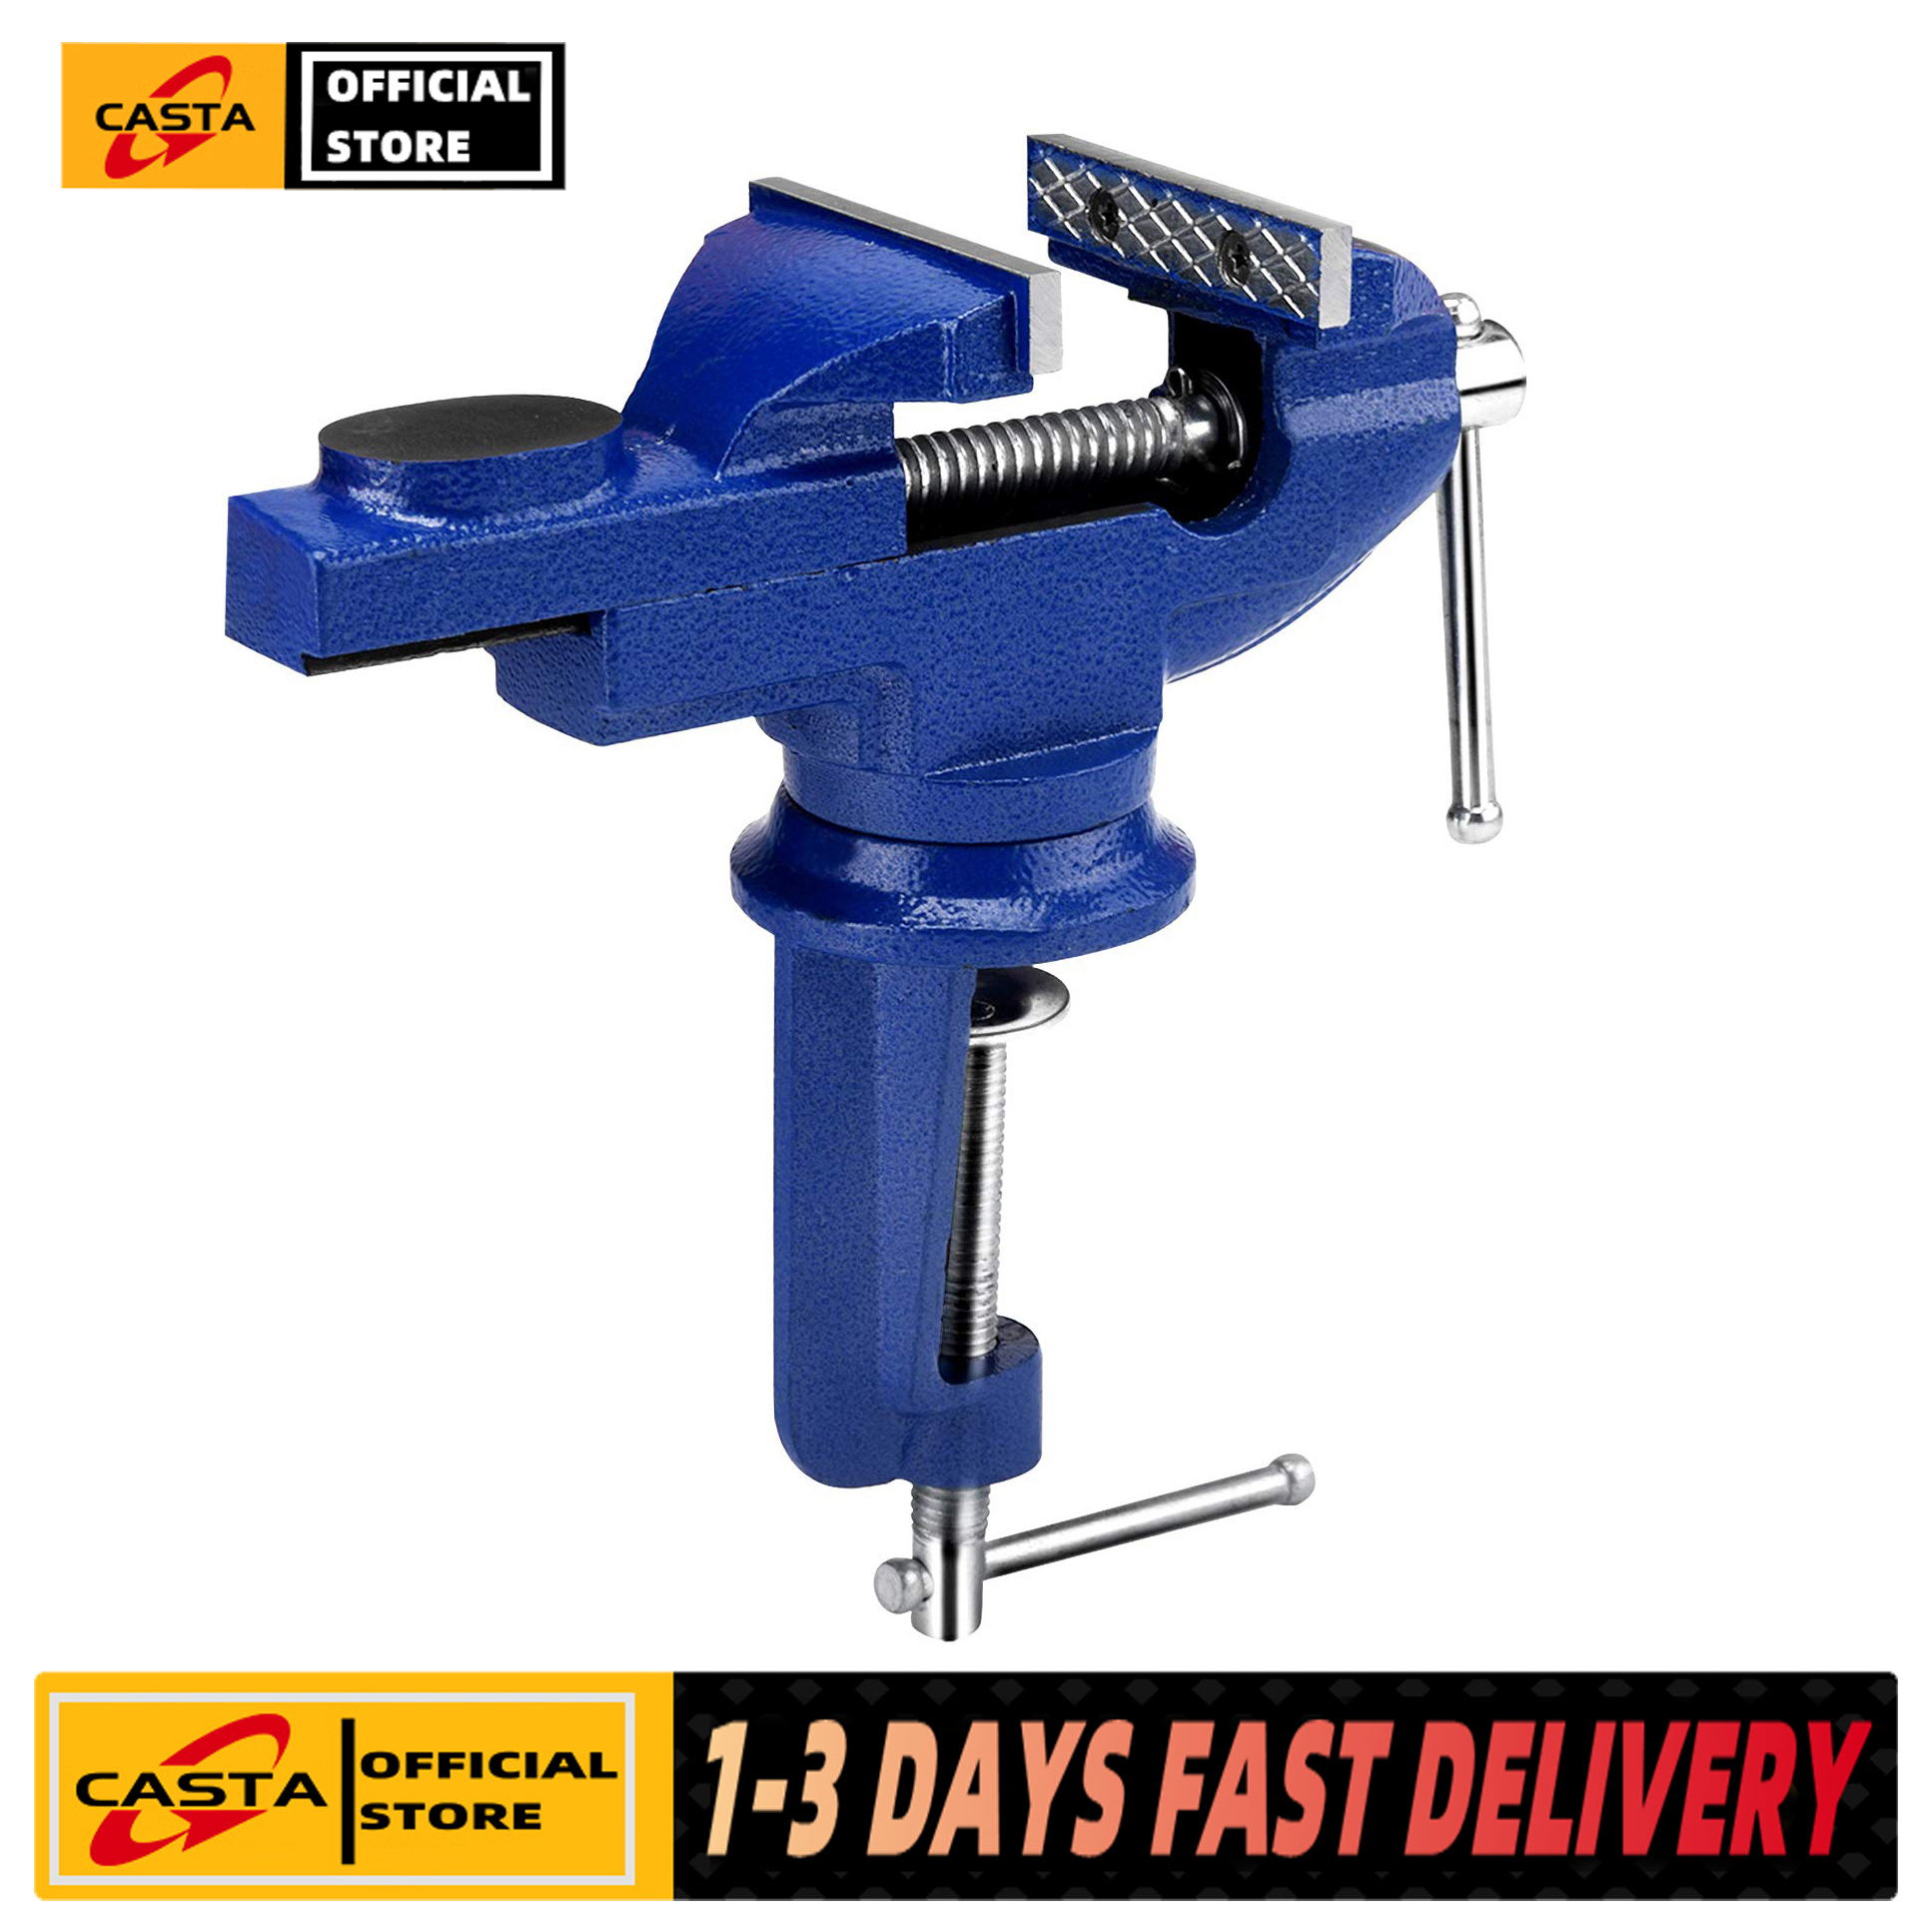 3 Bench Clamp, Official Store